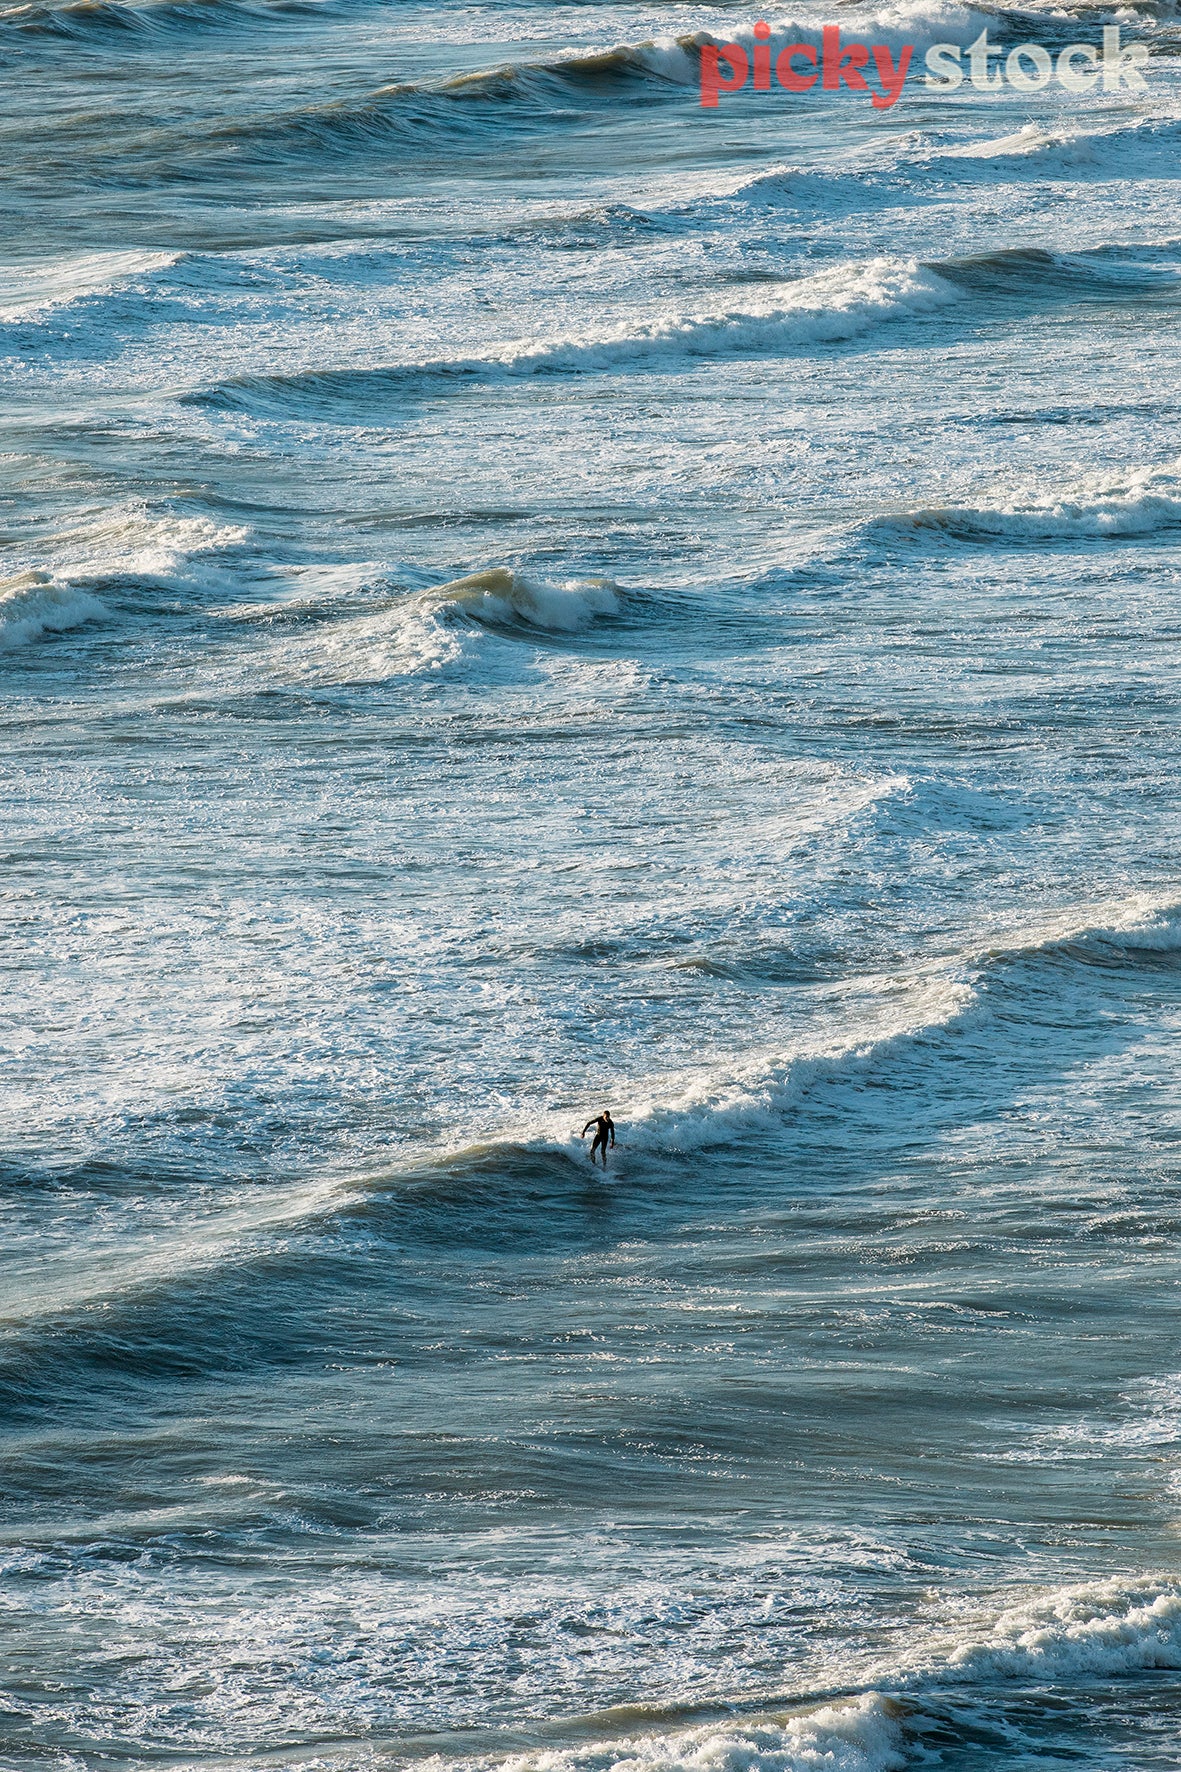 Lone surfer on the waves at O'Niels bay, Te Henga, West Auckland. 